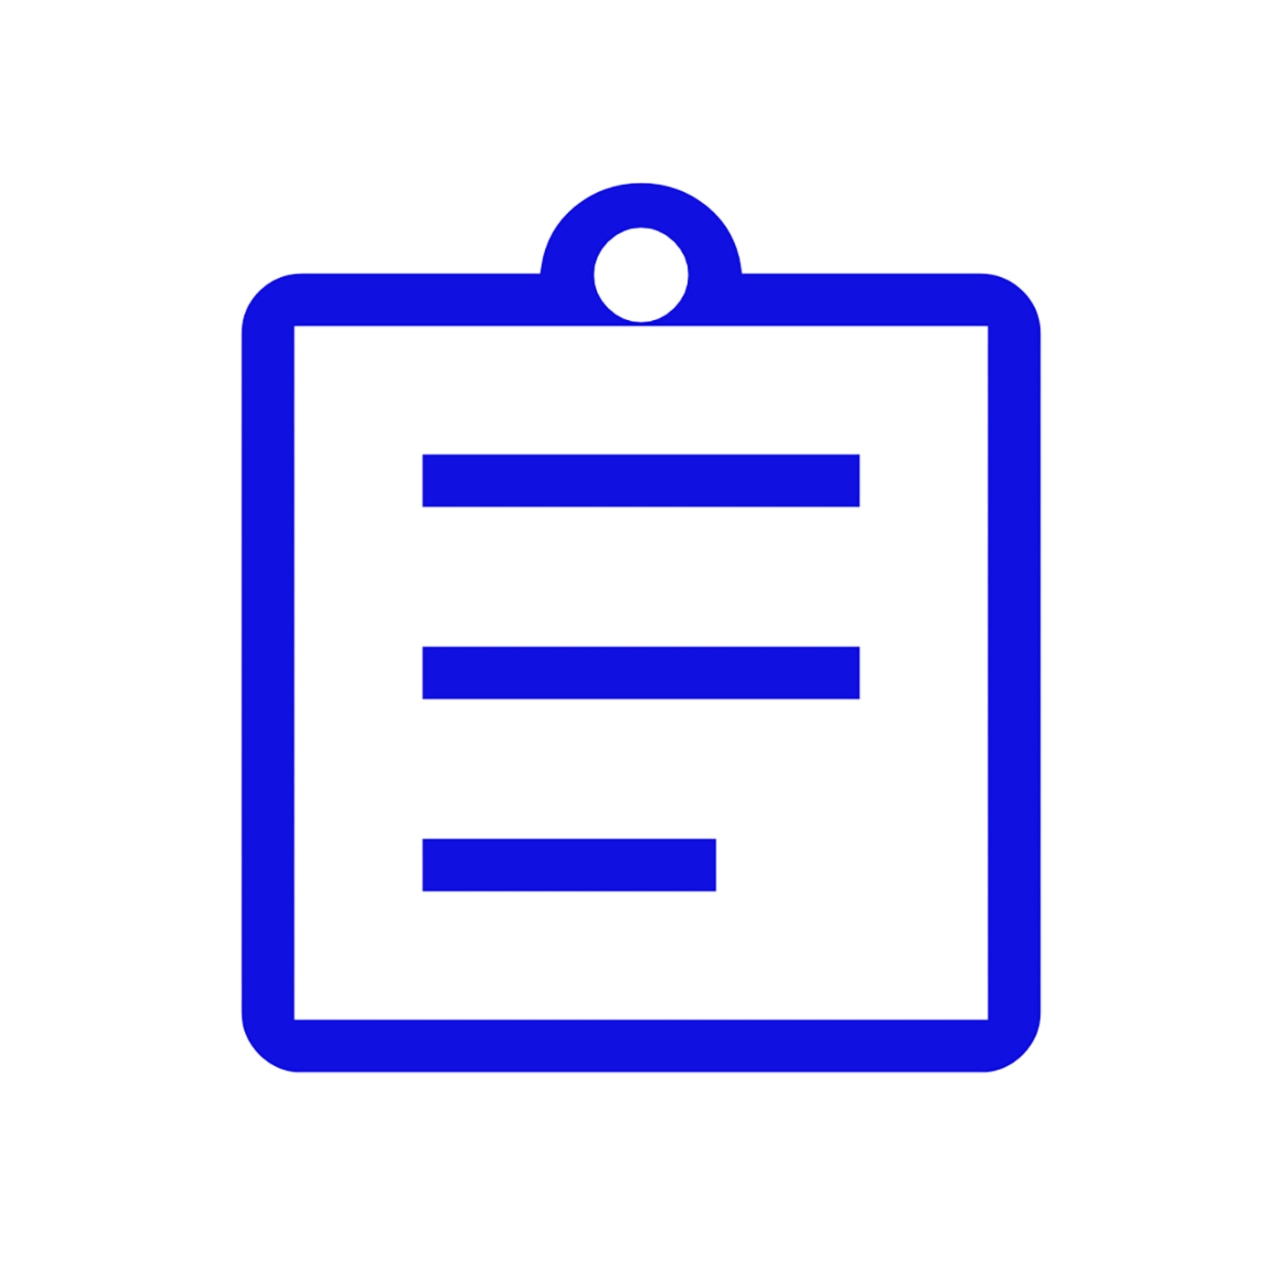 Clipboard illustrated icon